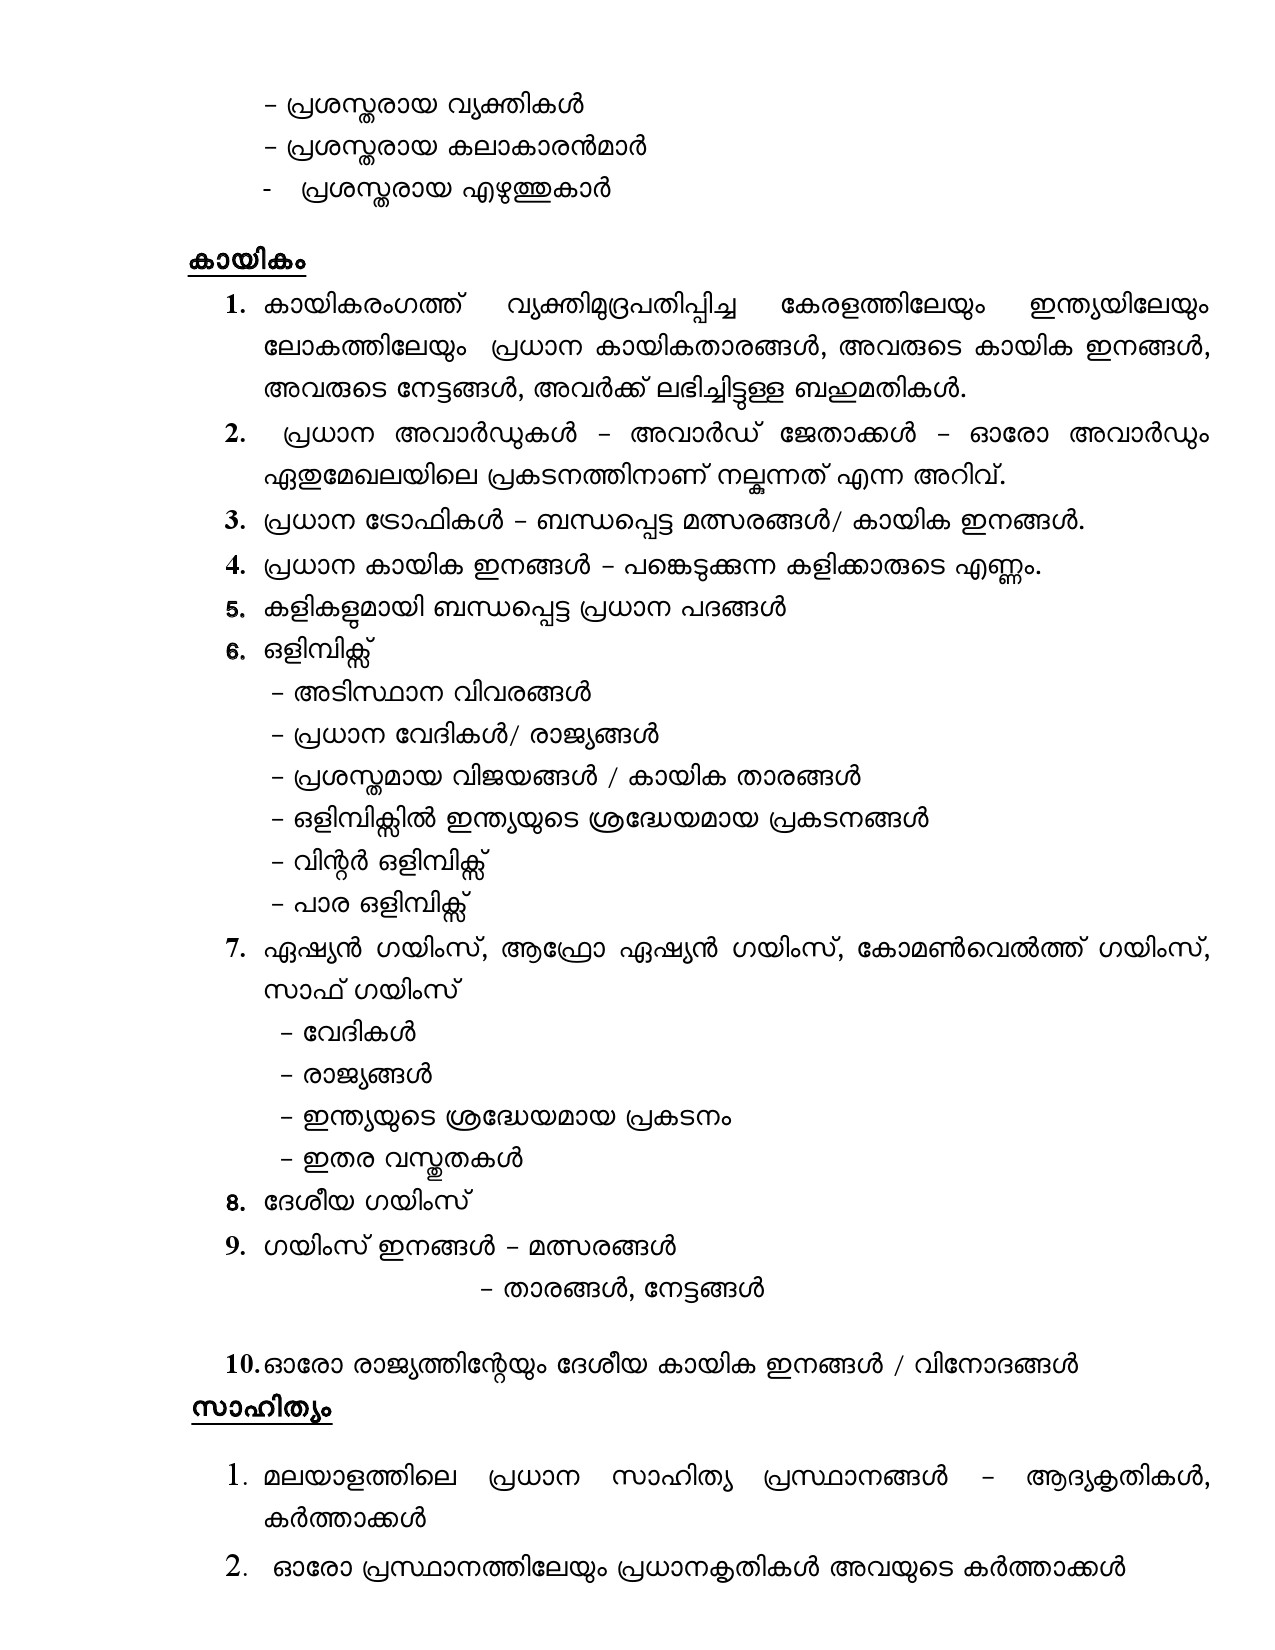 Civil Excise Officer Final Examination Syllabus For Plus Two Level - Notification Image 6